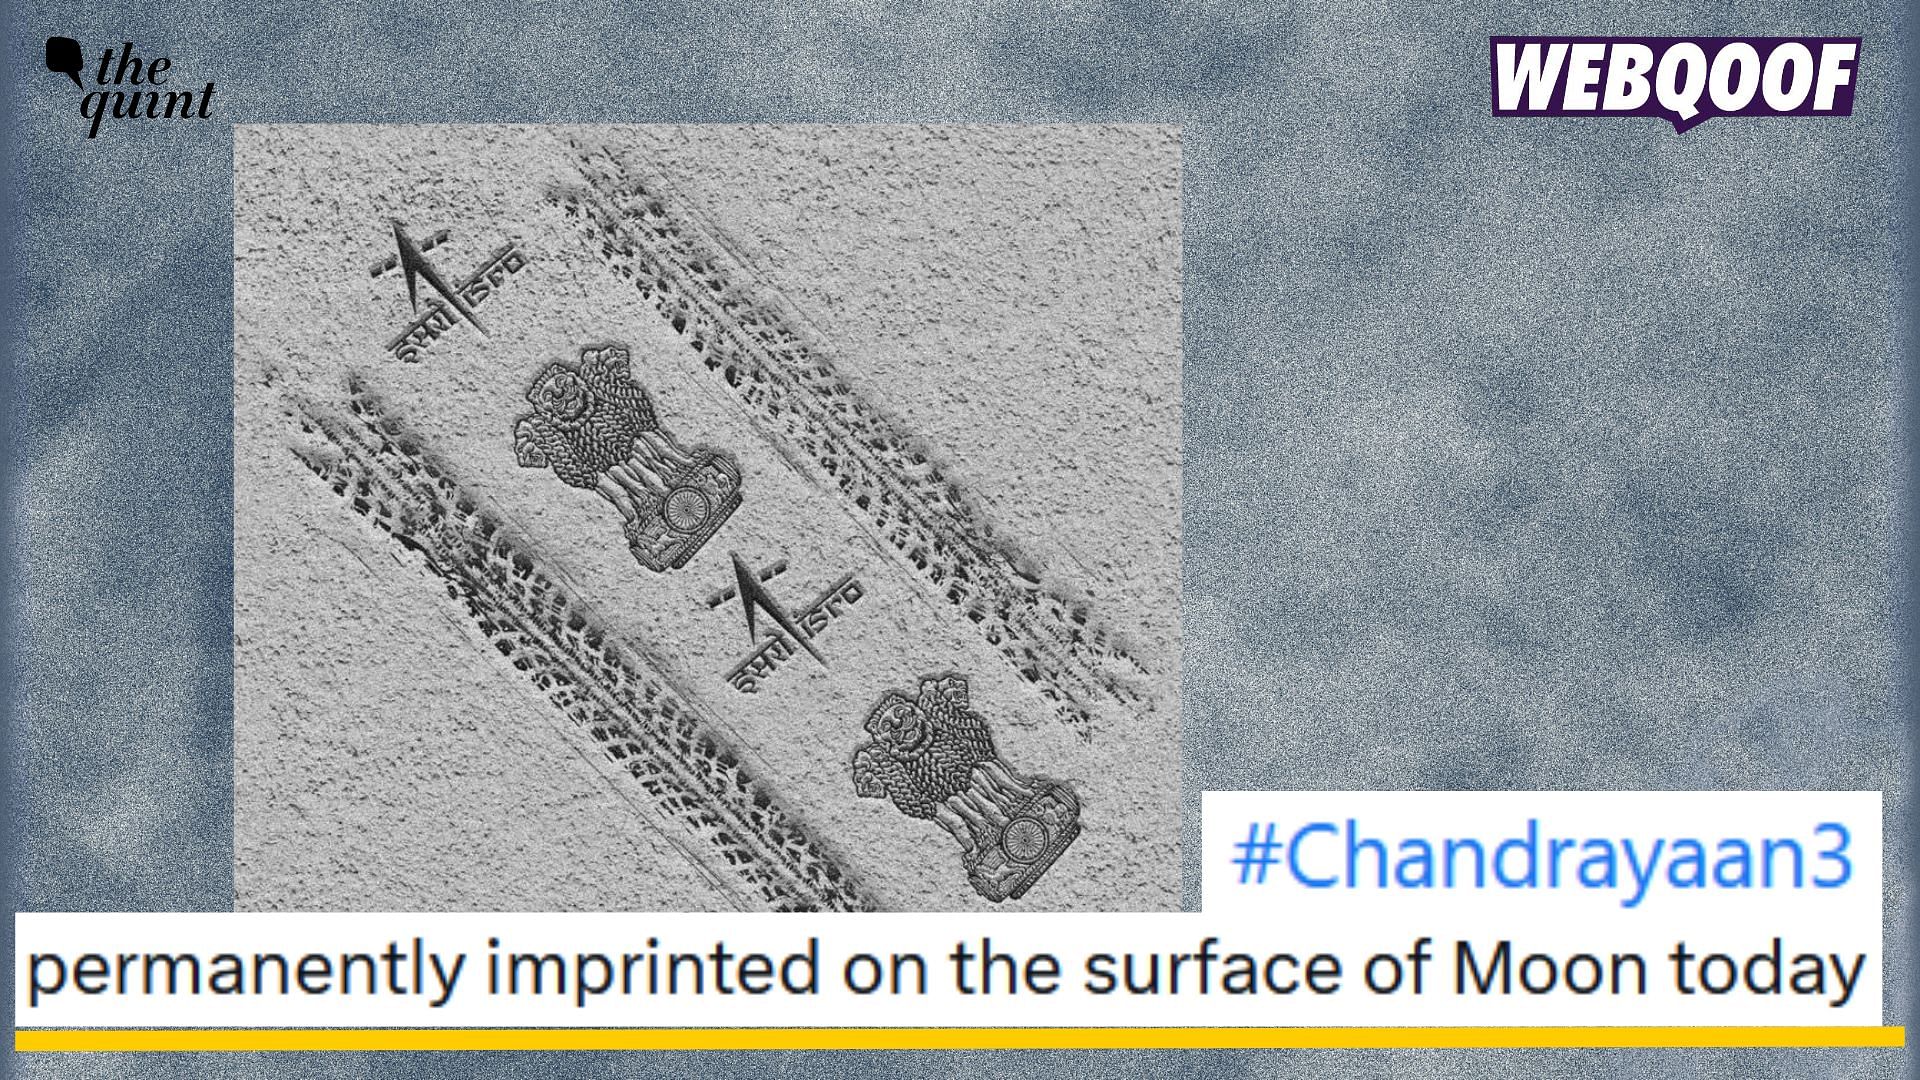 <div class="paragraphs"><p>Fact-check: An edited image of the national emblem and ISRO logo is being falsely shared as an image showing imprints left by Chandrayaan-3 on the moon's surface. </p></div>